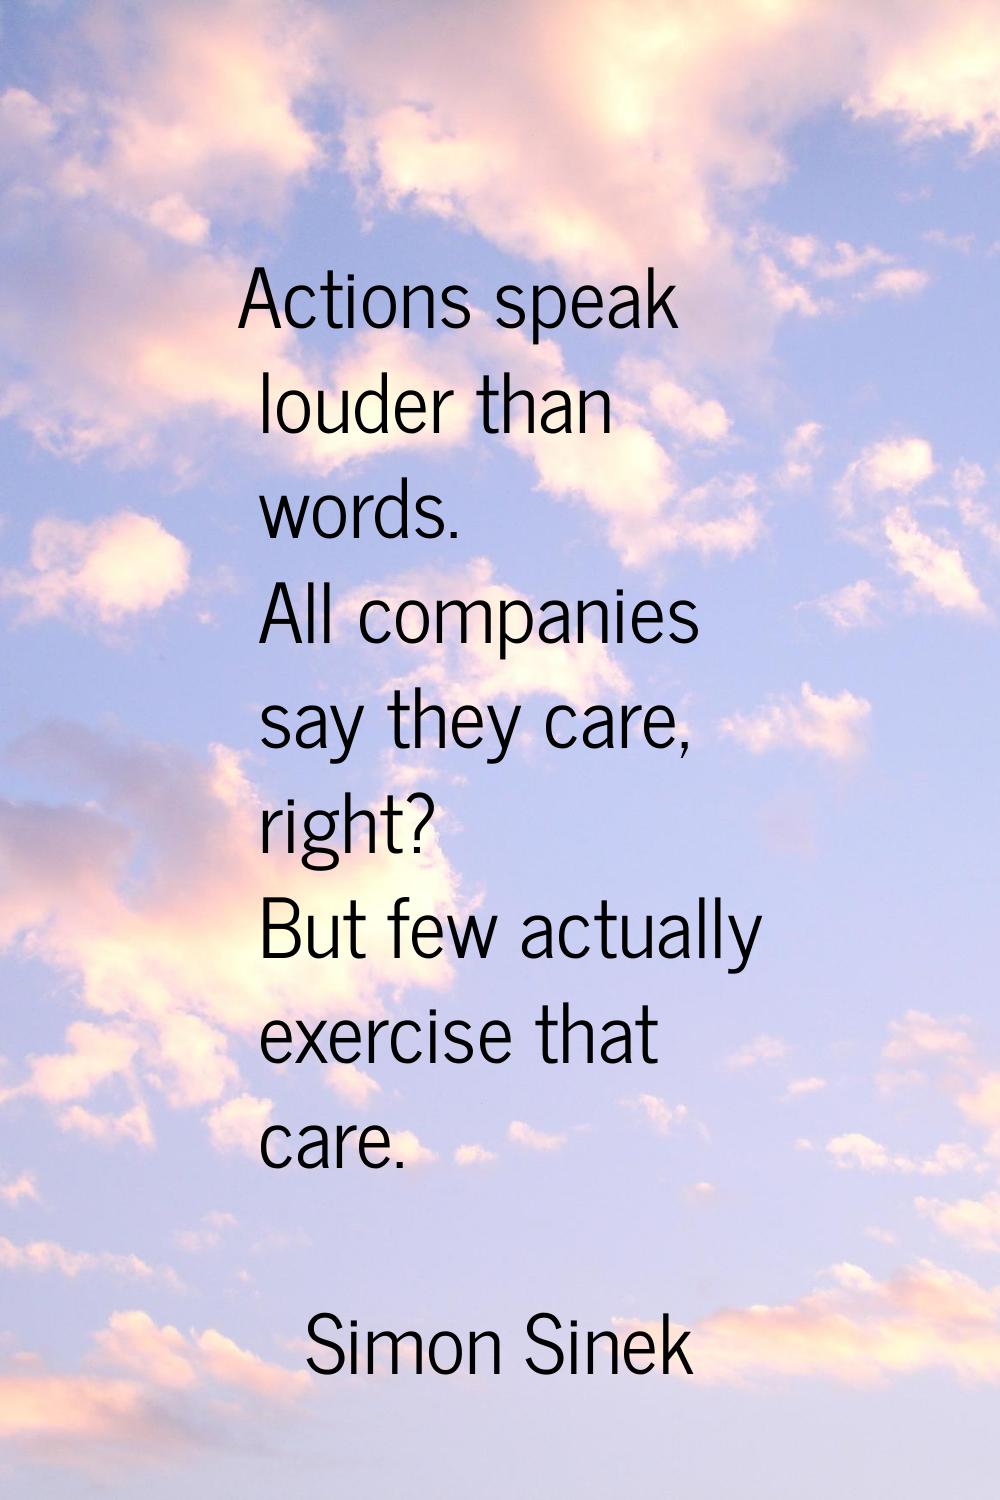 Actions speak louder than words. All companies say they care, right? But few actually exercise that